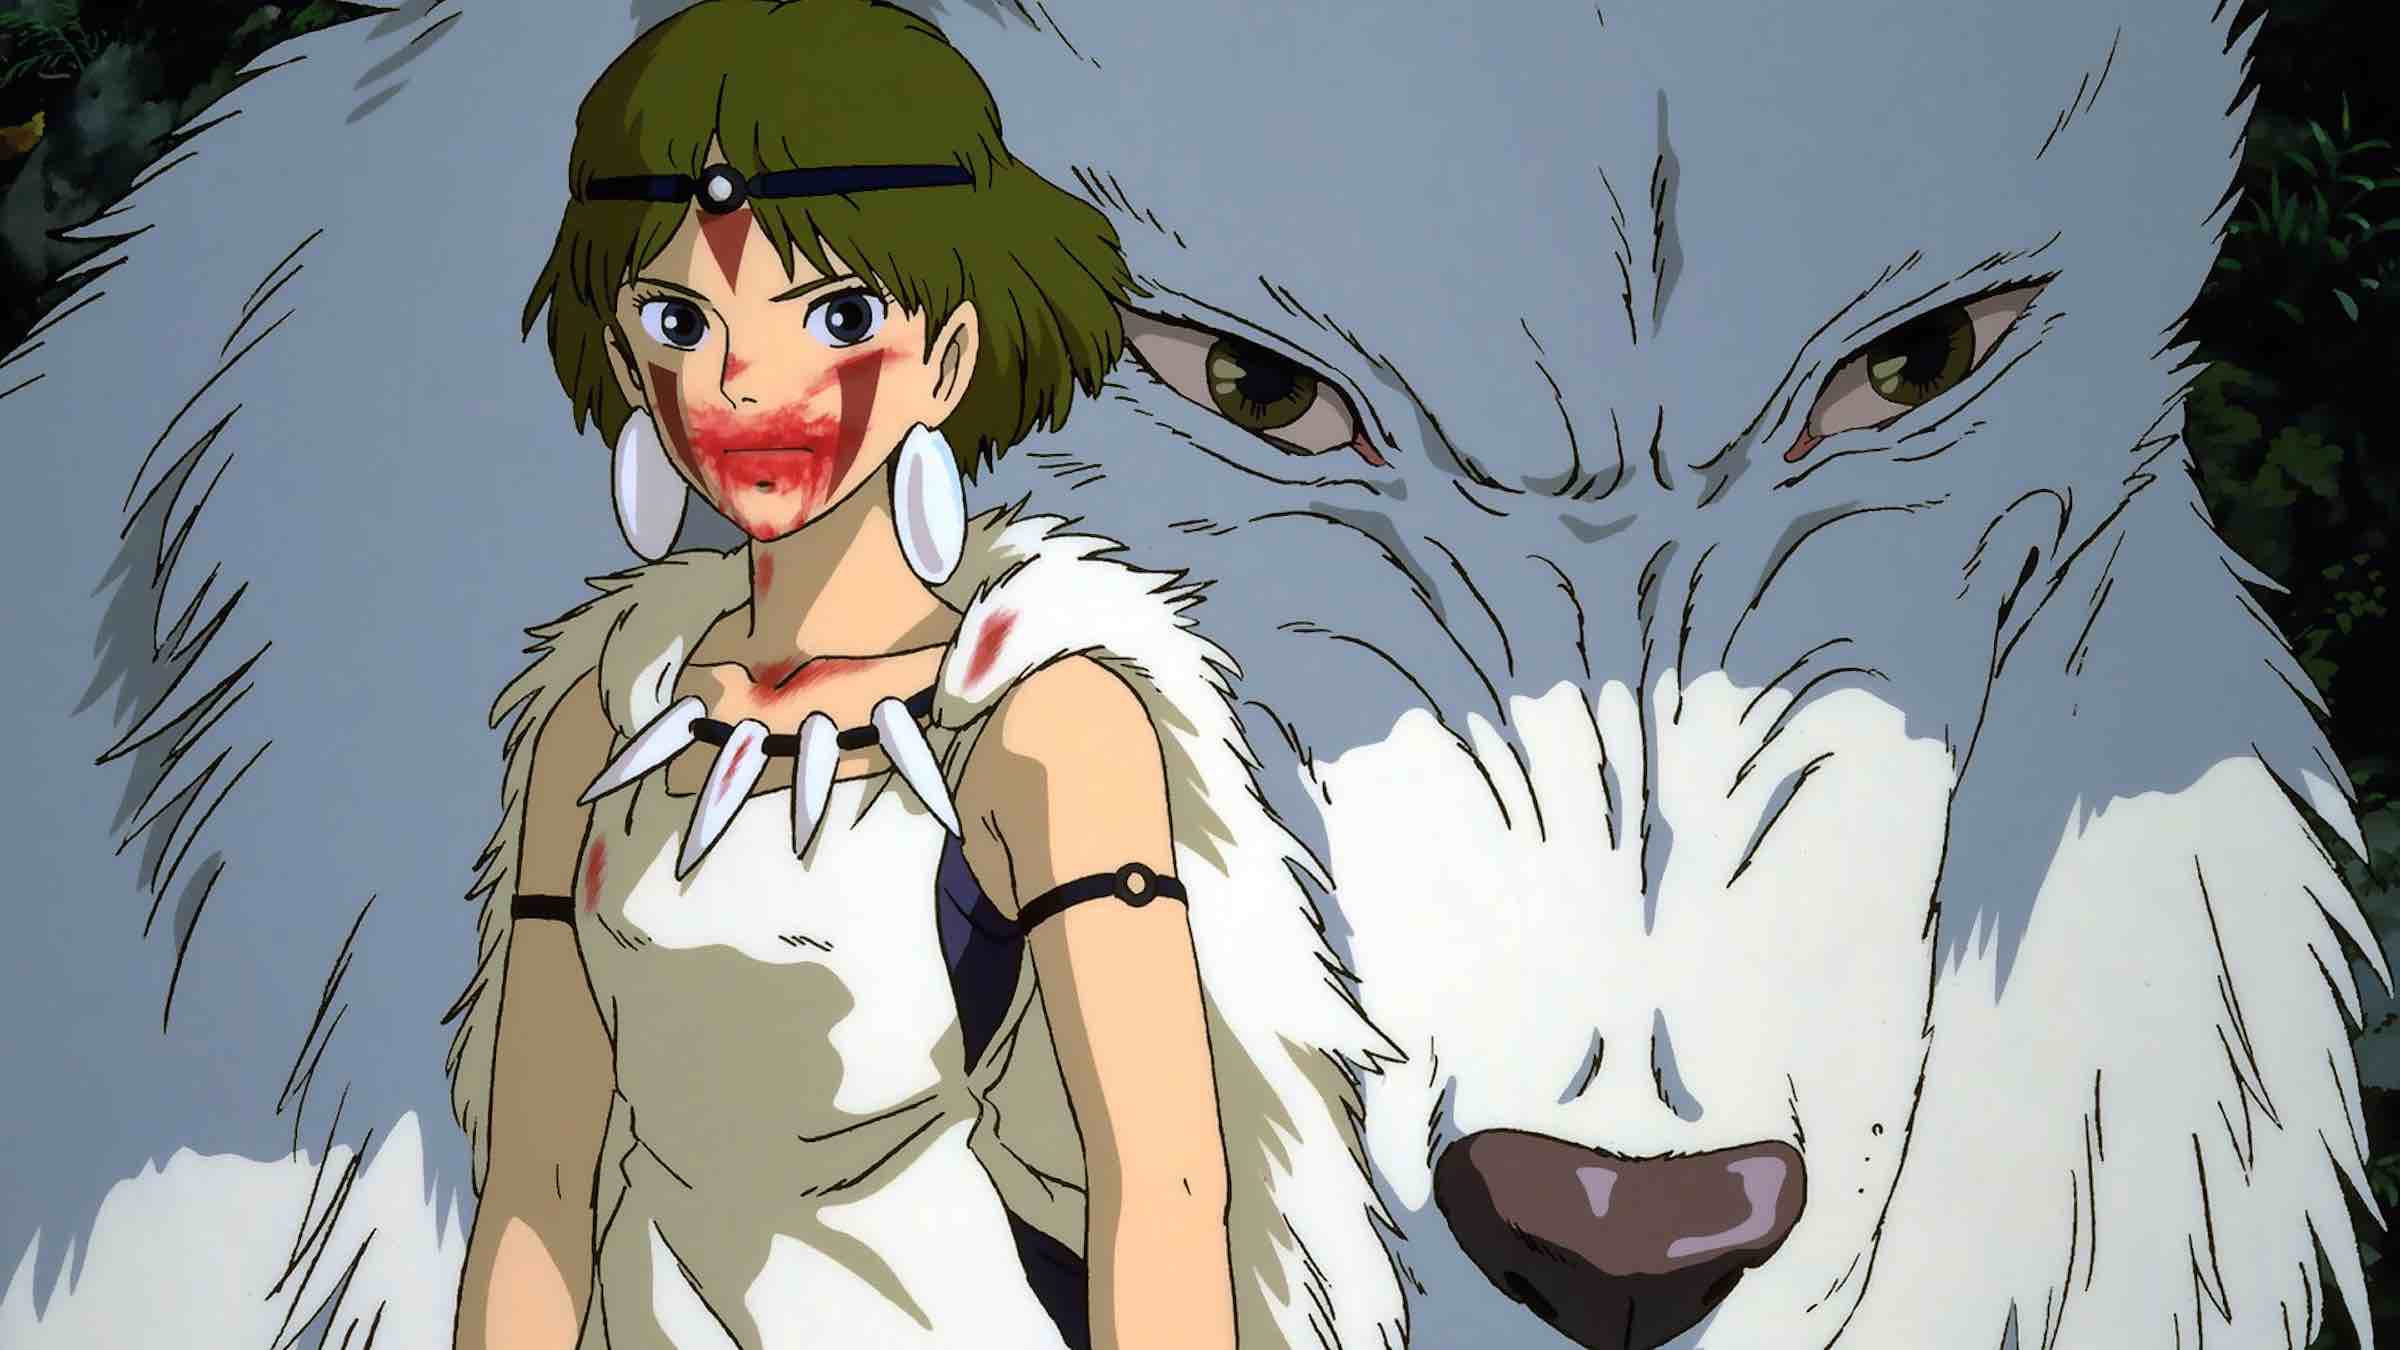 Strong and passionate, Studio Ghibli's characters take our breath away. We're recognizing the venerable heroines of different Studio Ghibli films.